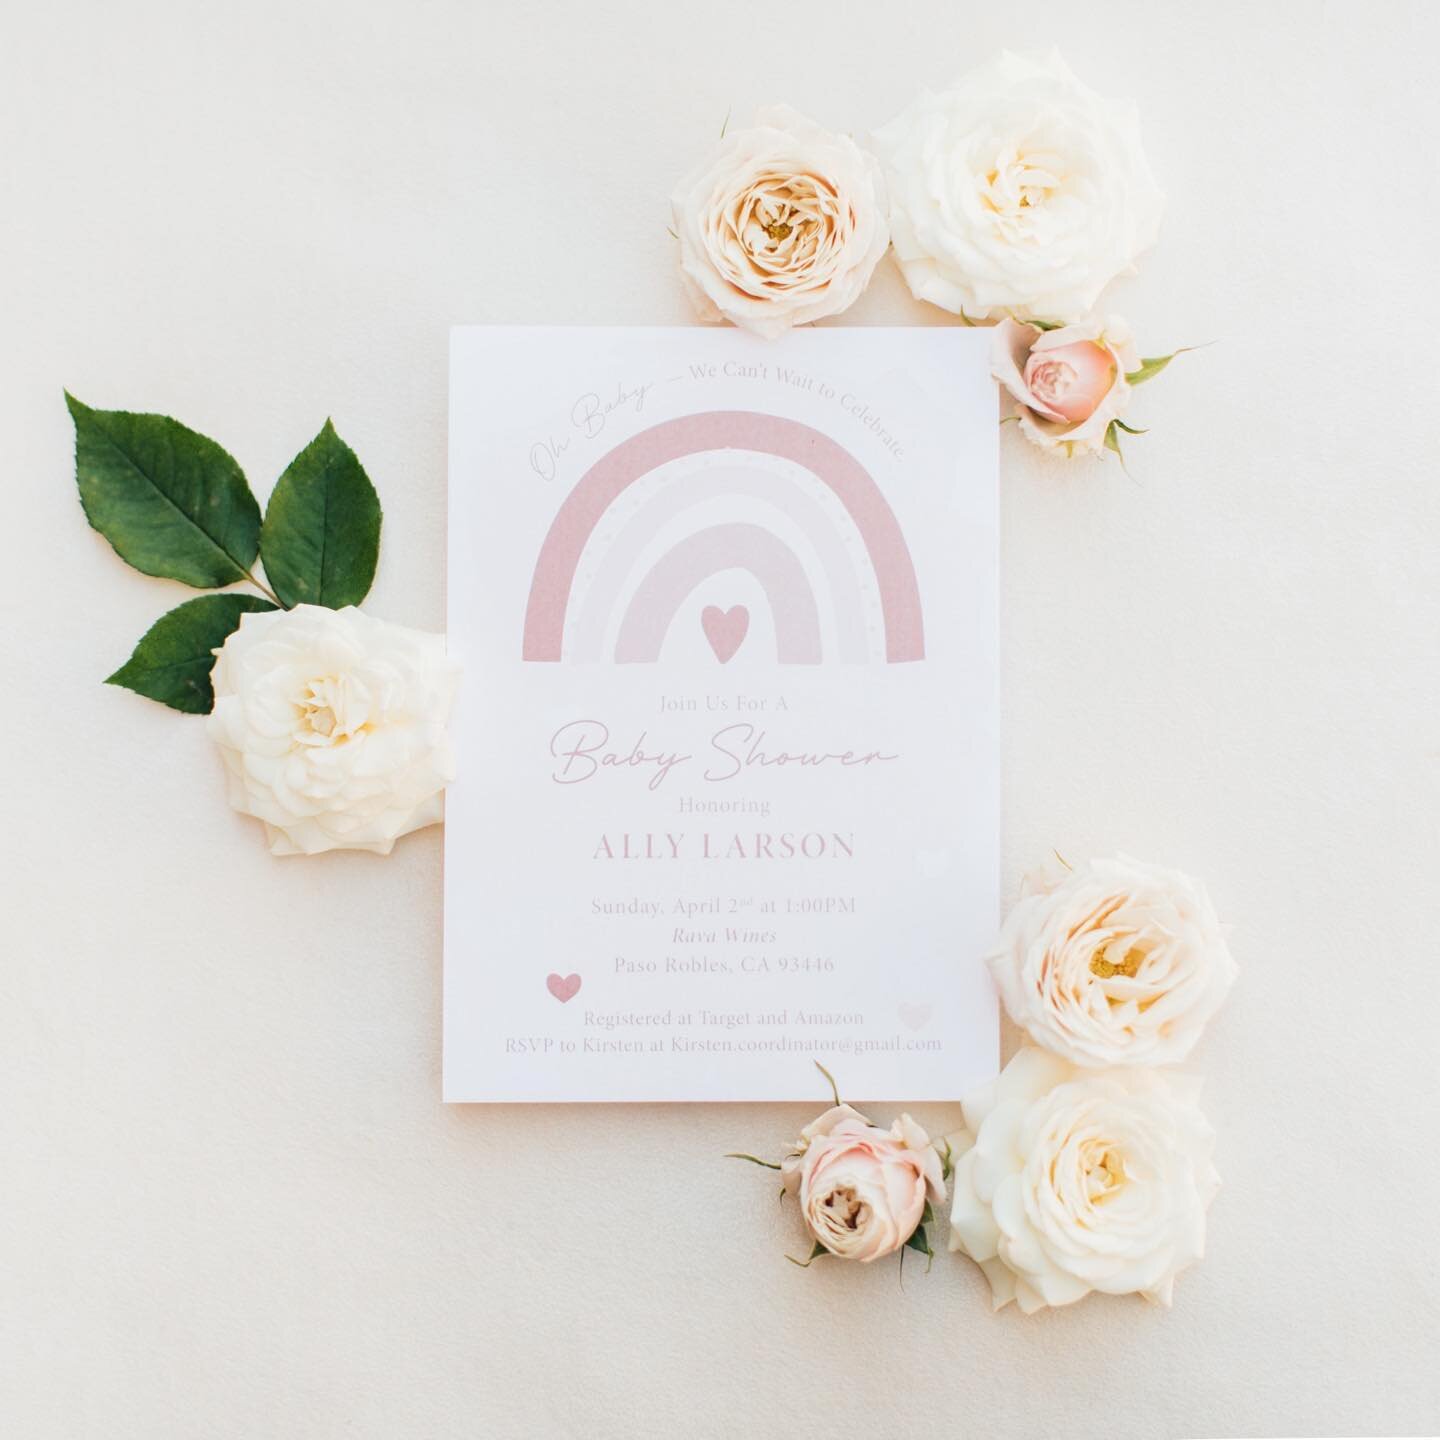 Oh baby &mdash; we love a good shower invitation 💕 

&bull;
&bull;

Host: @brookesmithartistry
Design + Coordination: @inspired_events_collective 
Venue: @ravawinesweddings
Macarons/Macaron tower: @boymama_bakes
Cakes + Cupcakes: @__thewoodenspoon__